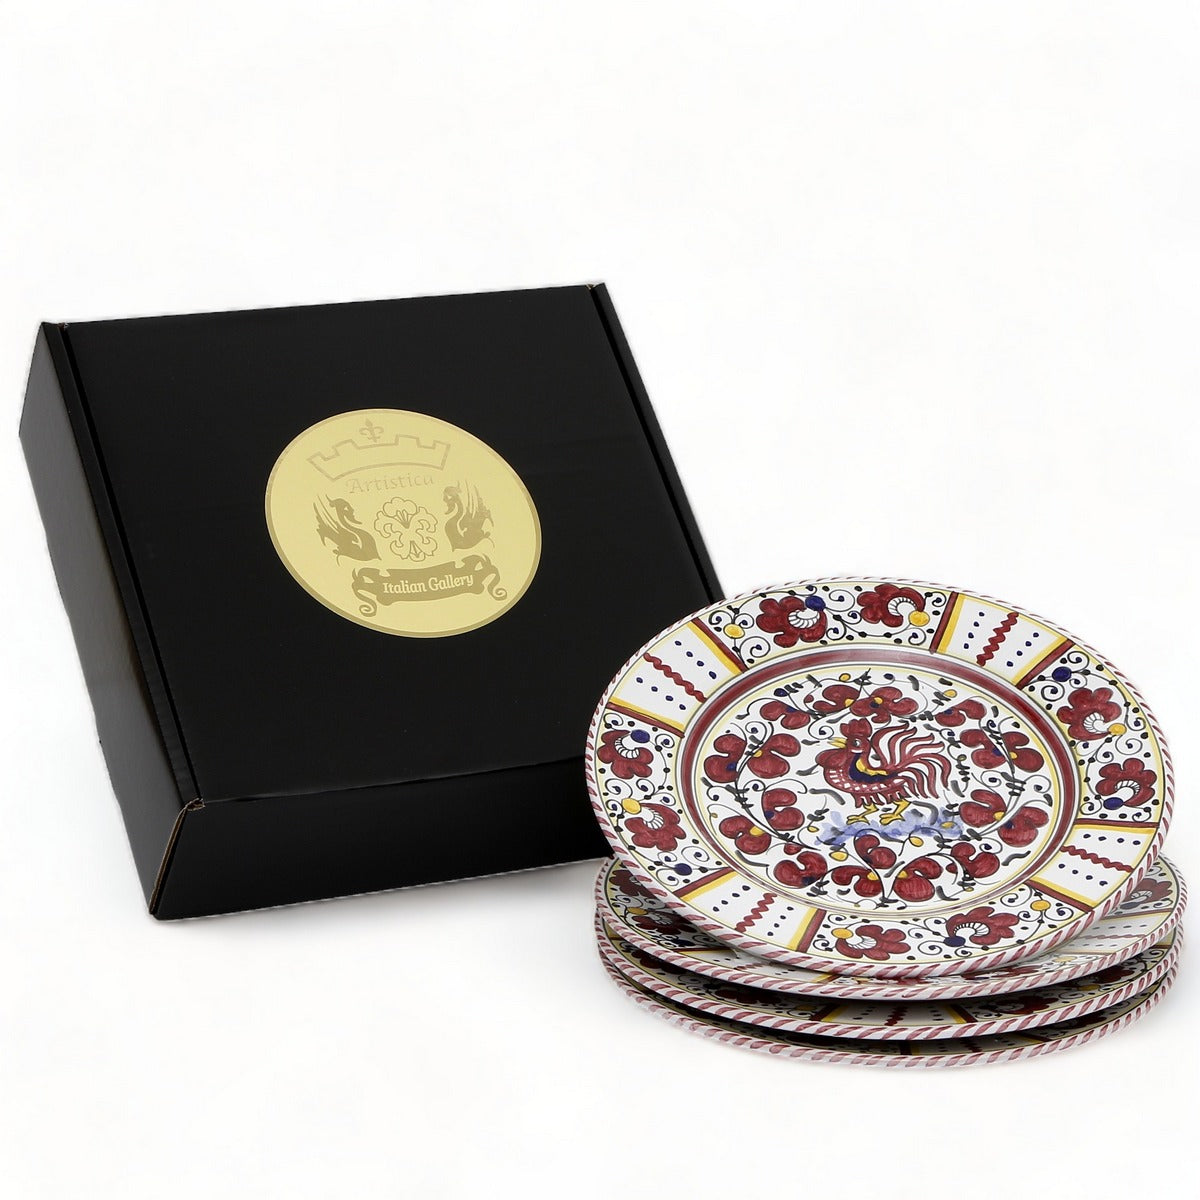 GIFT BOX: With Deruta Dinner Plate - RED ROOSTER design (4 Pcs)